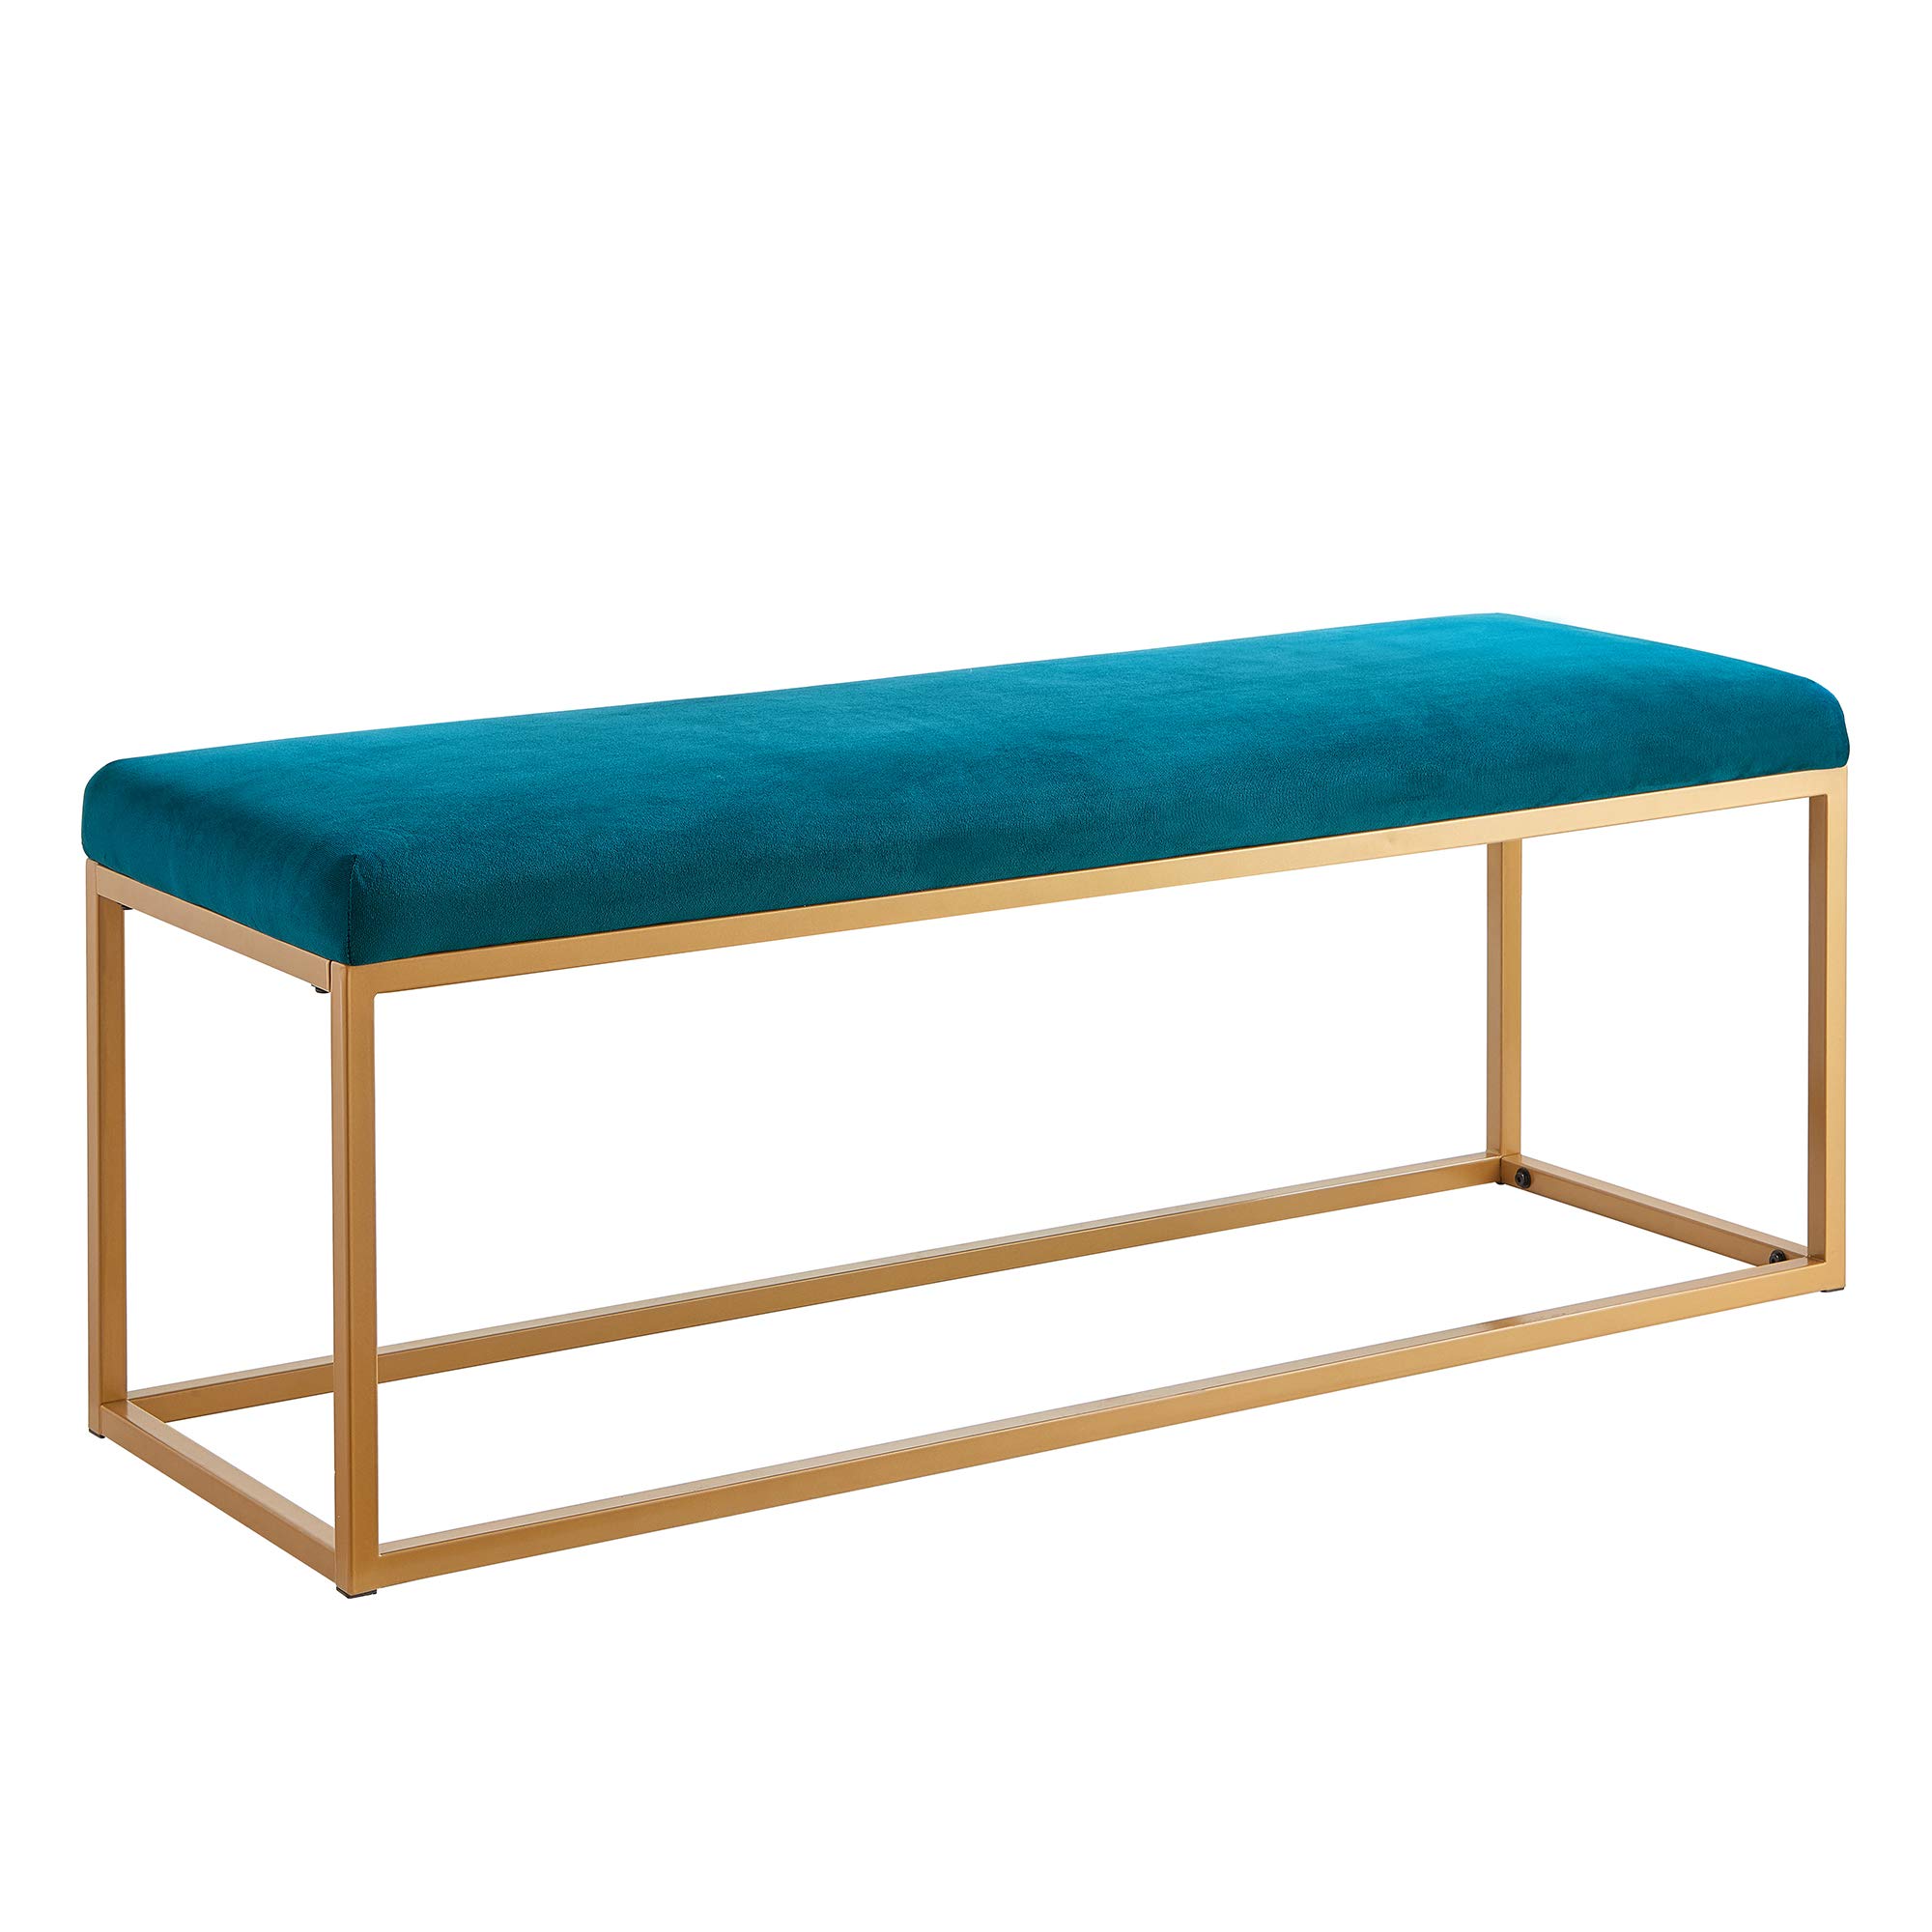 48" Ball & Cast Upholstered Bench Seat (Teal/Gold) $47 + Free Shipping